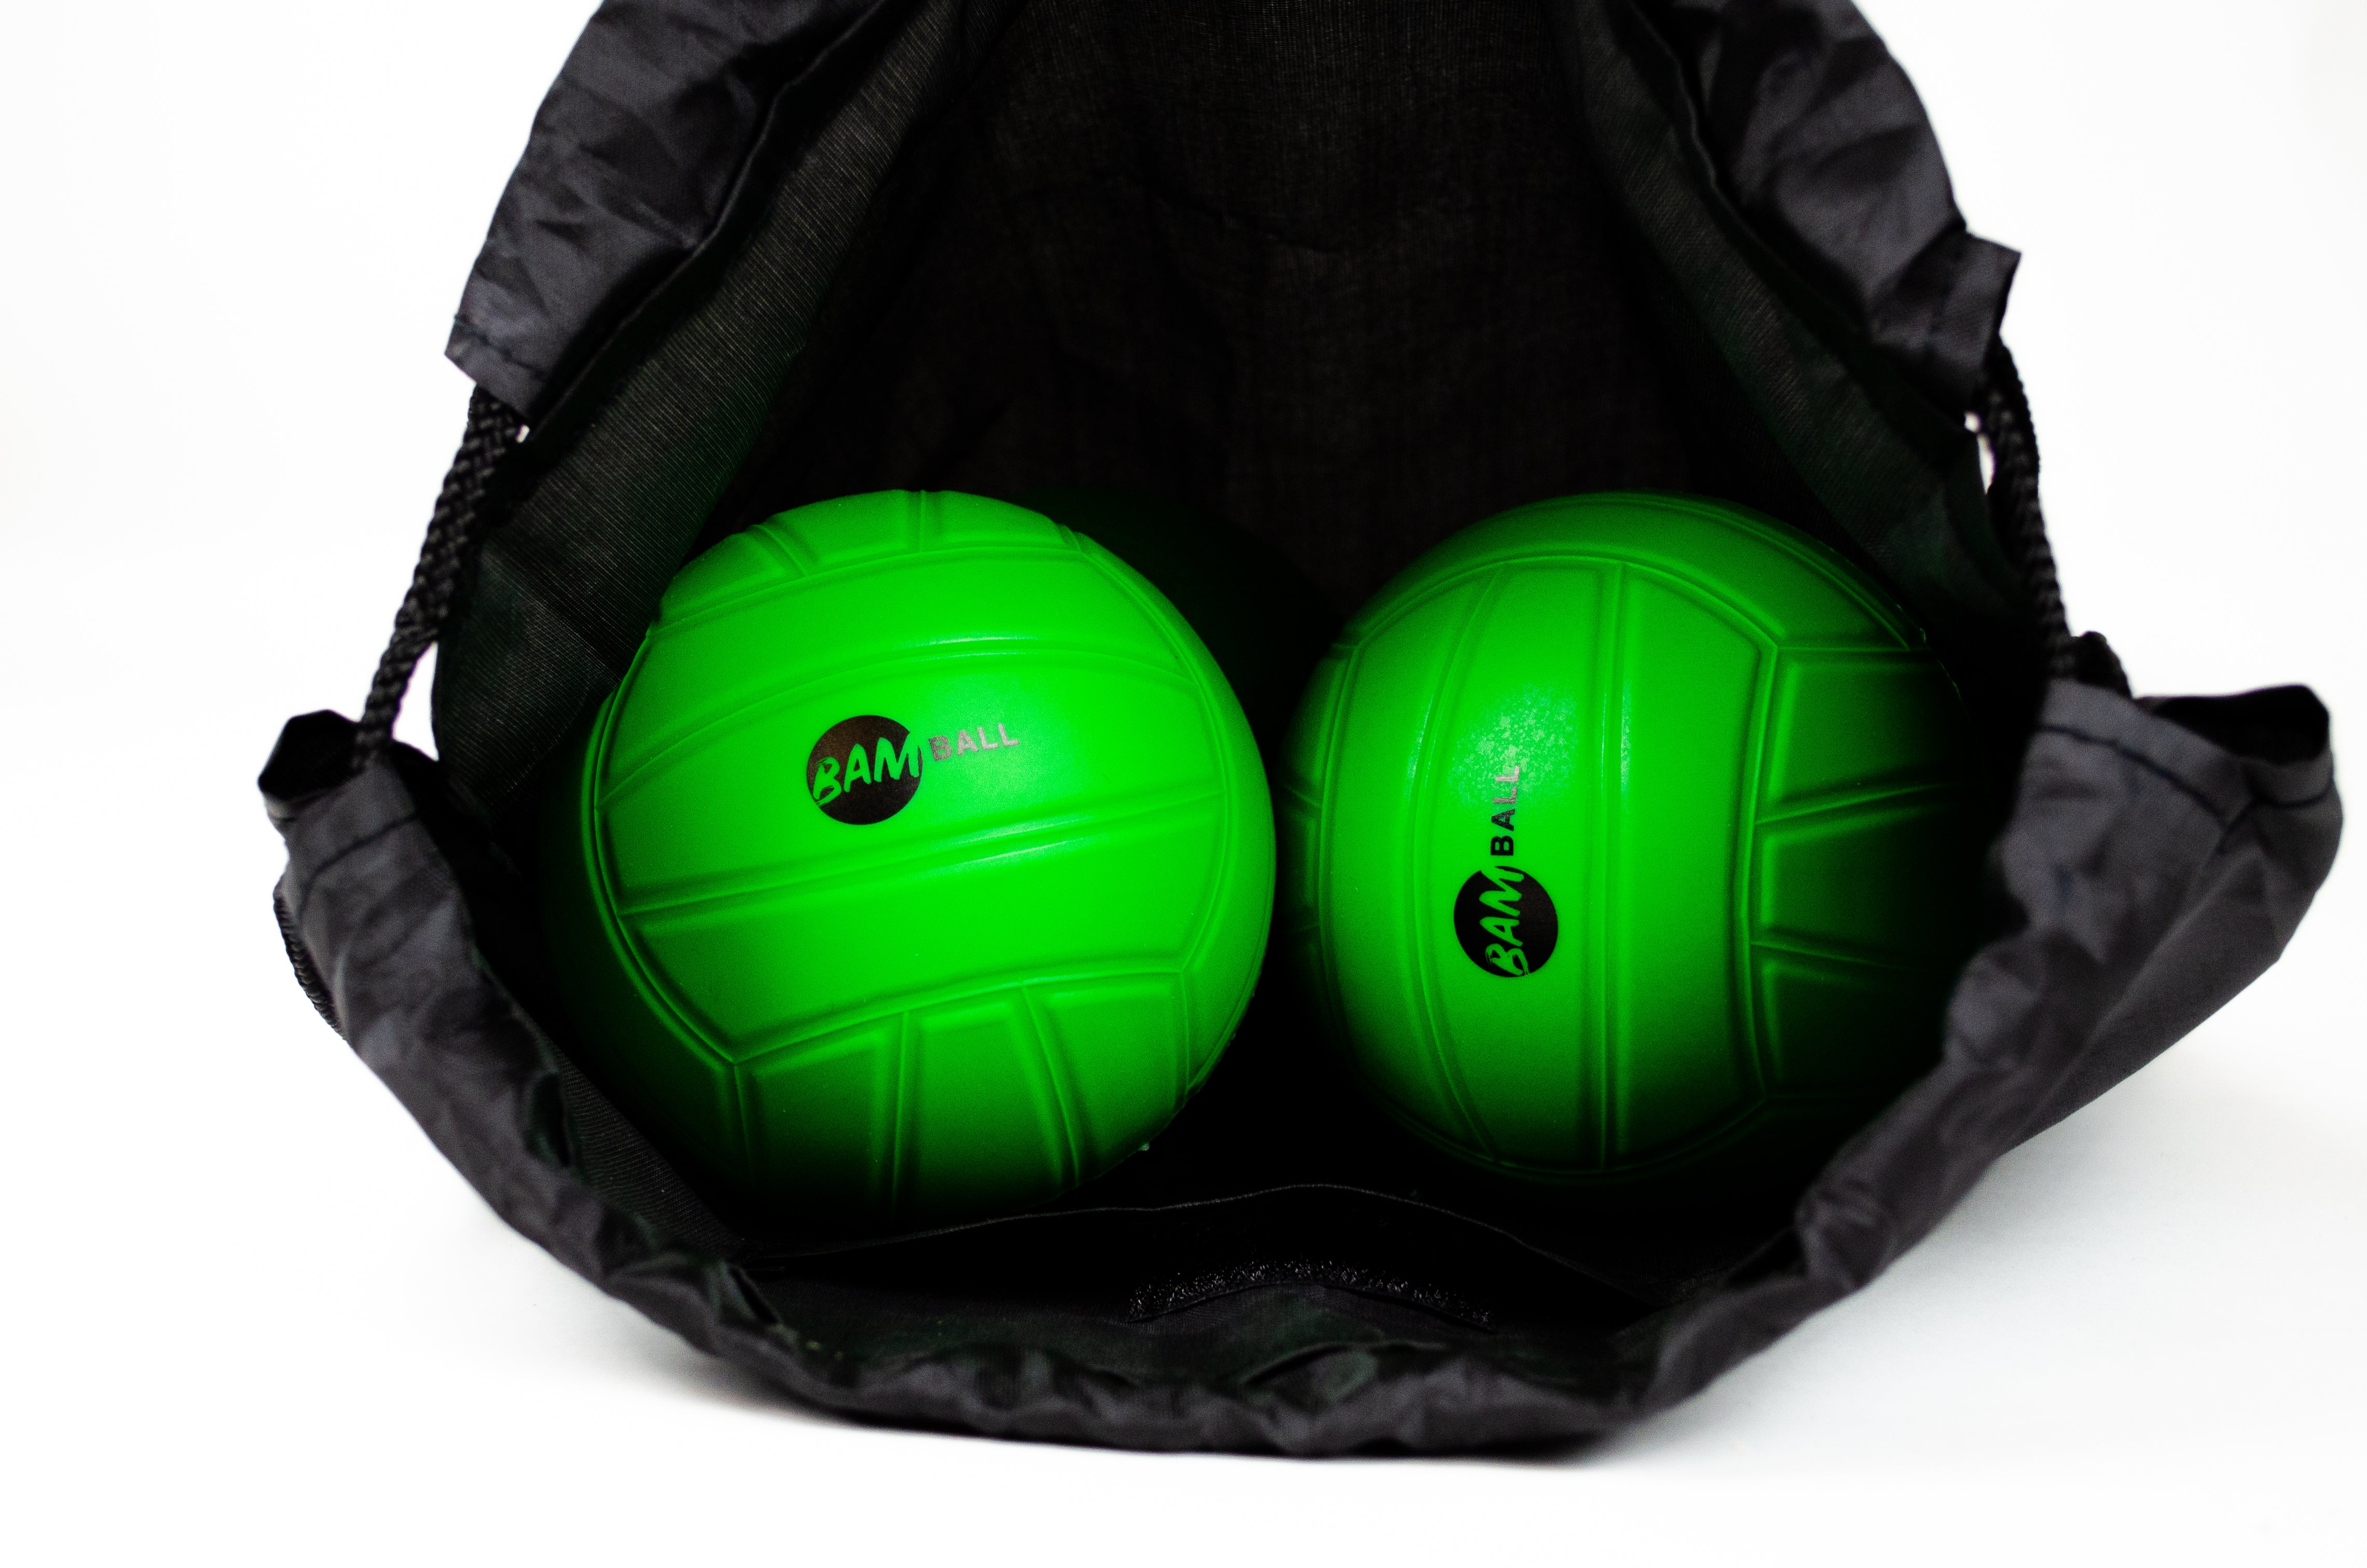 BamBall extra Trainings & Spielball Pack